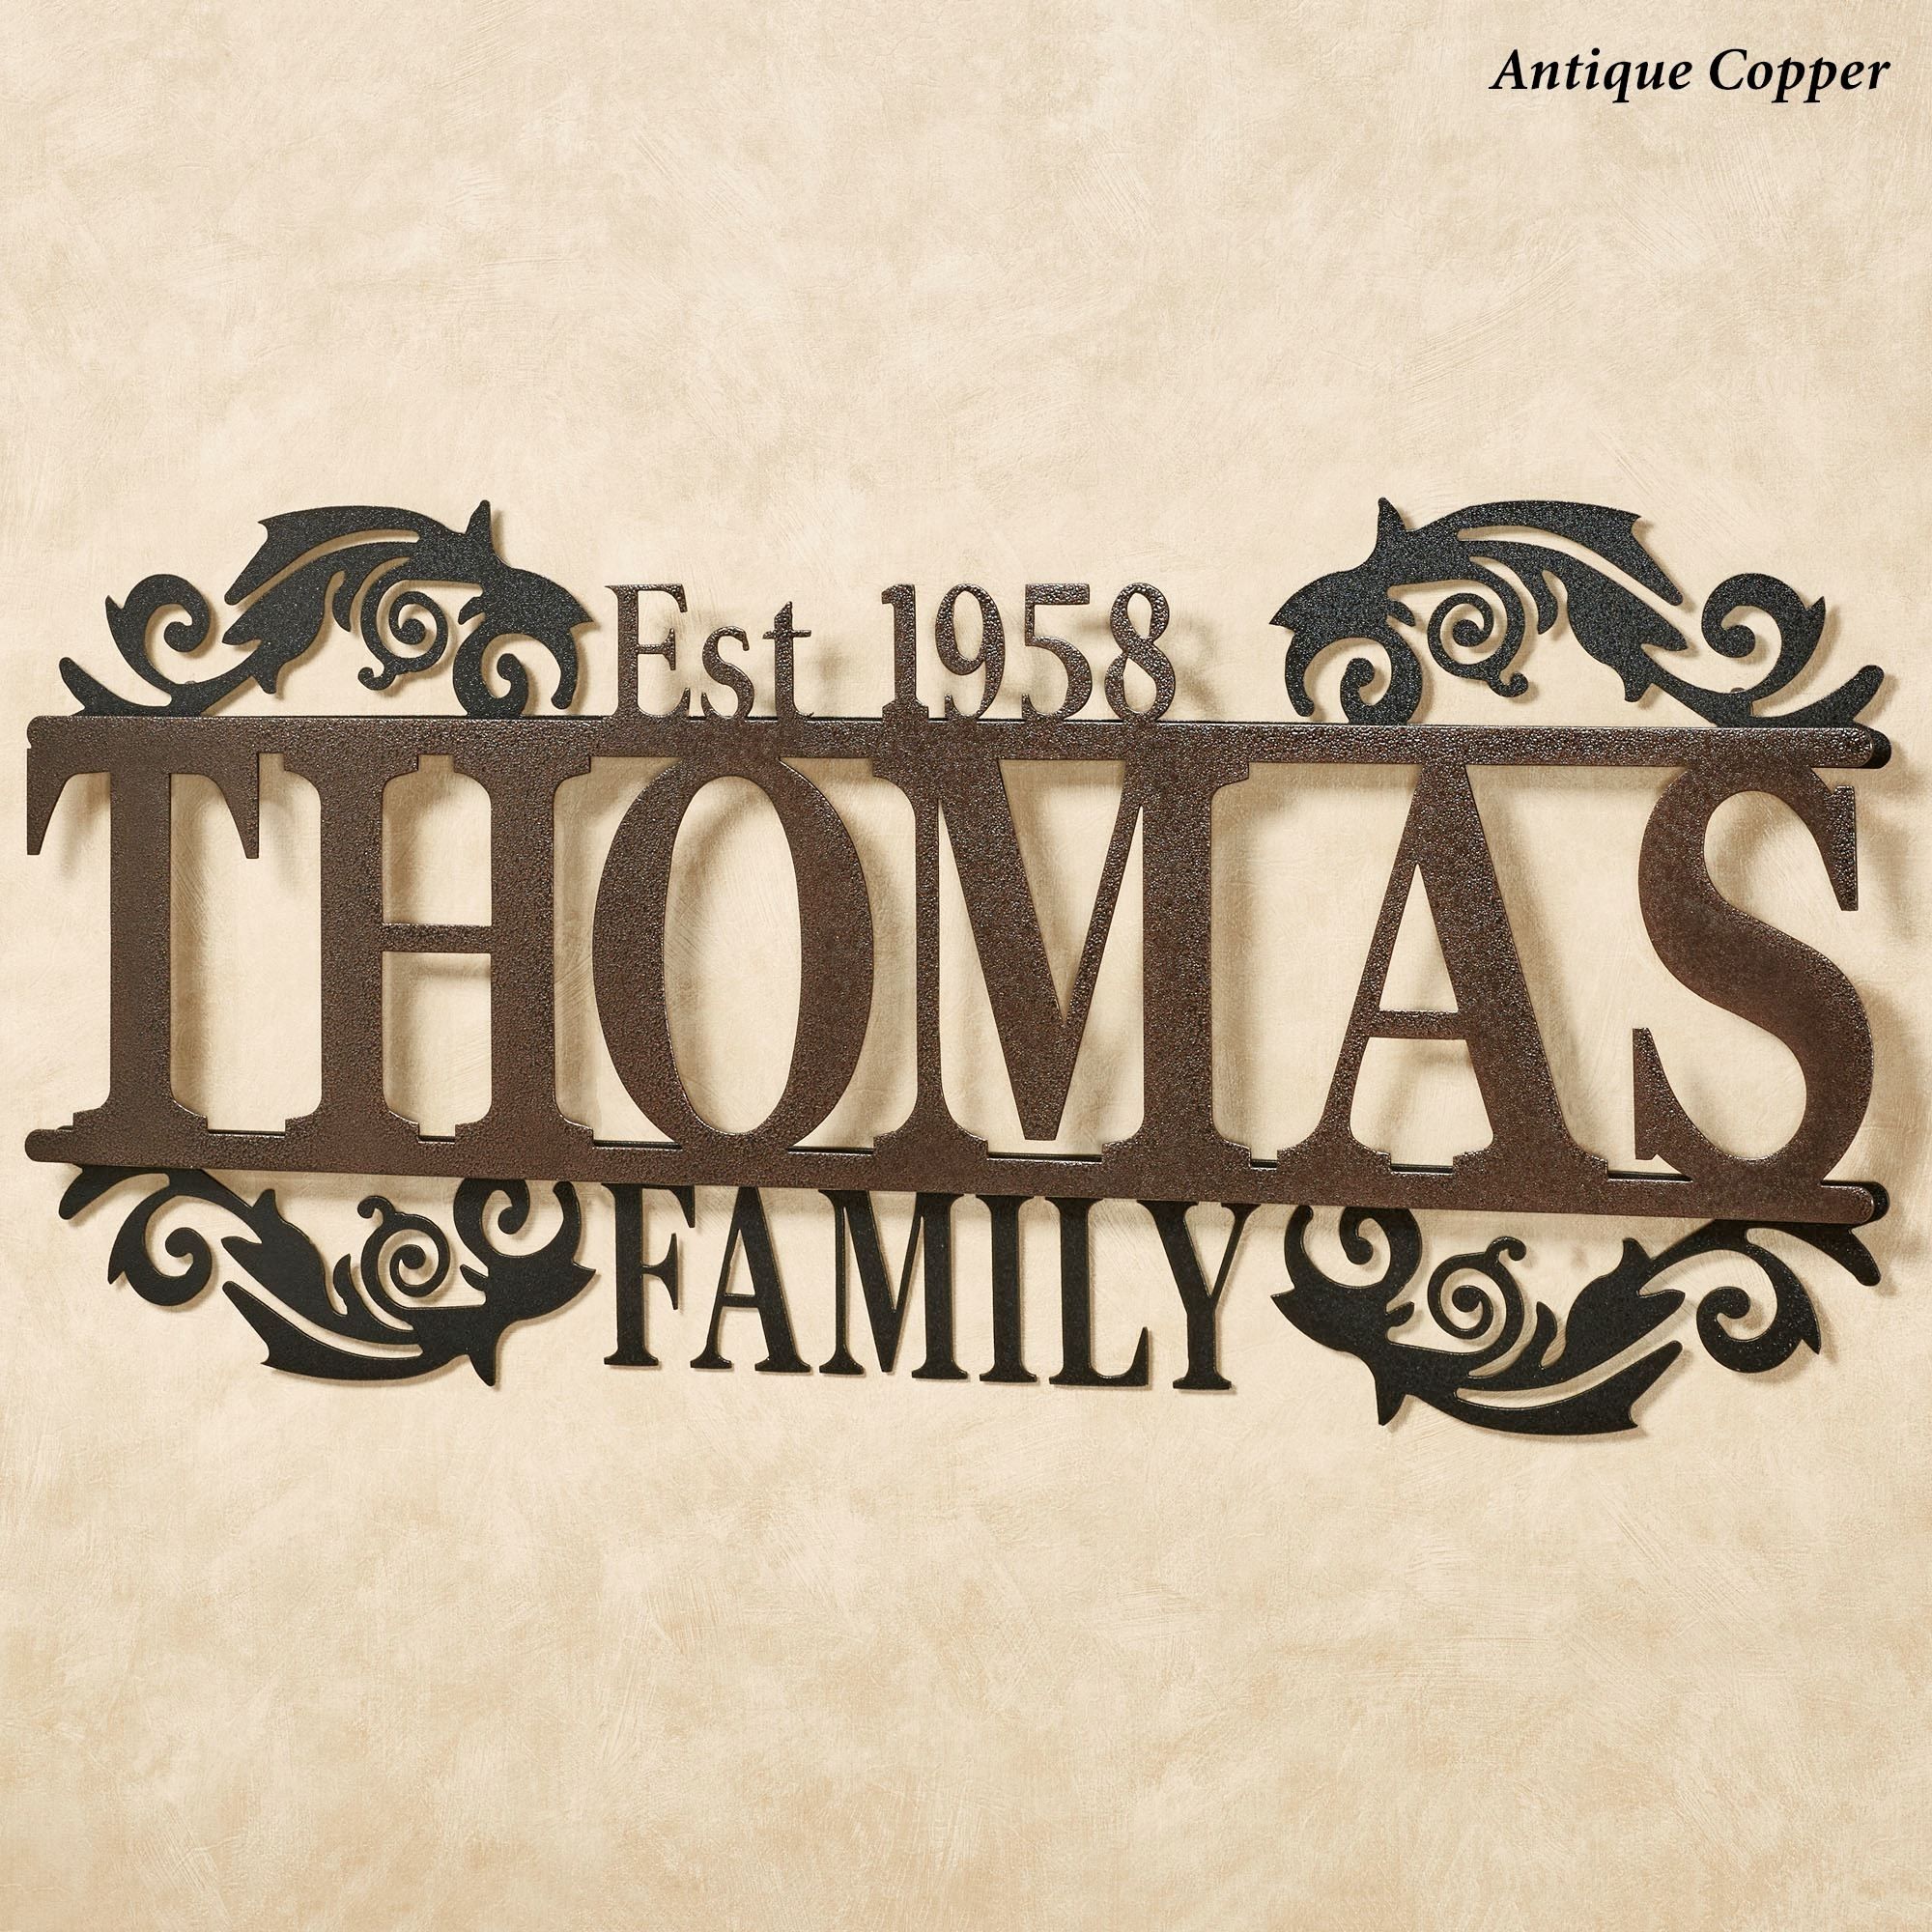 Legacy Family Established Year Personalized Metal Wall Art Sign In Family Metal Wall Art (View 4 of 20)